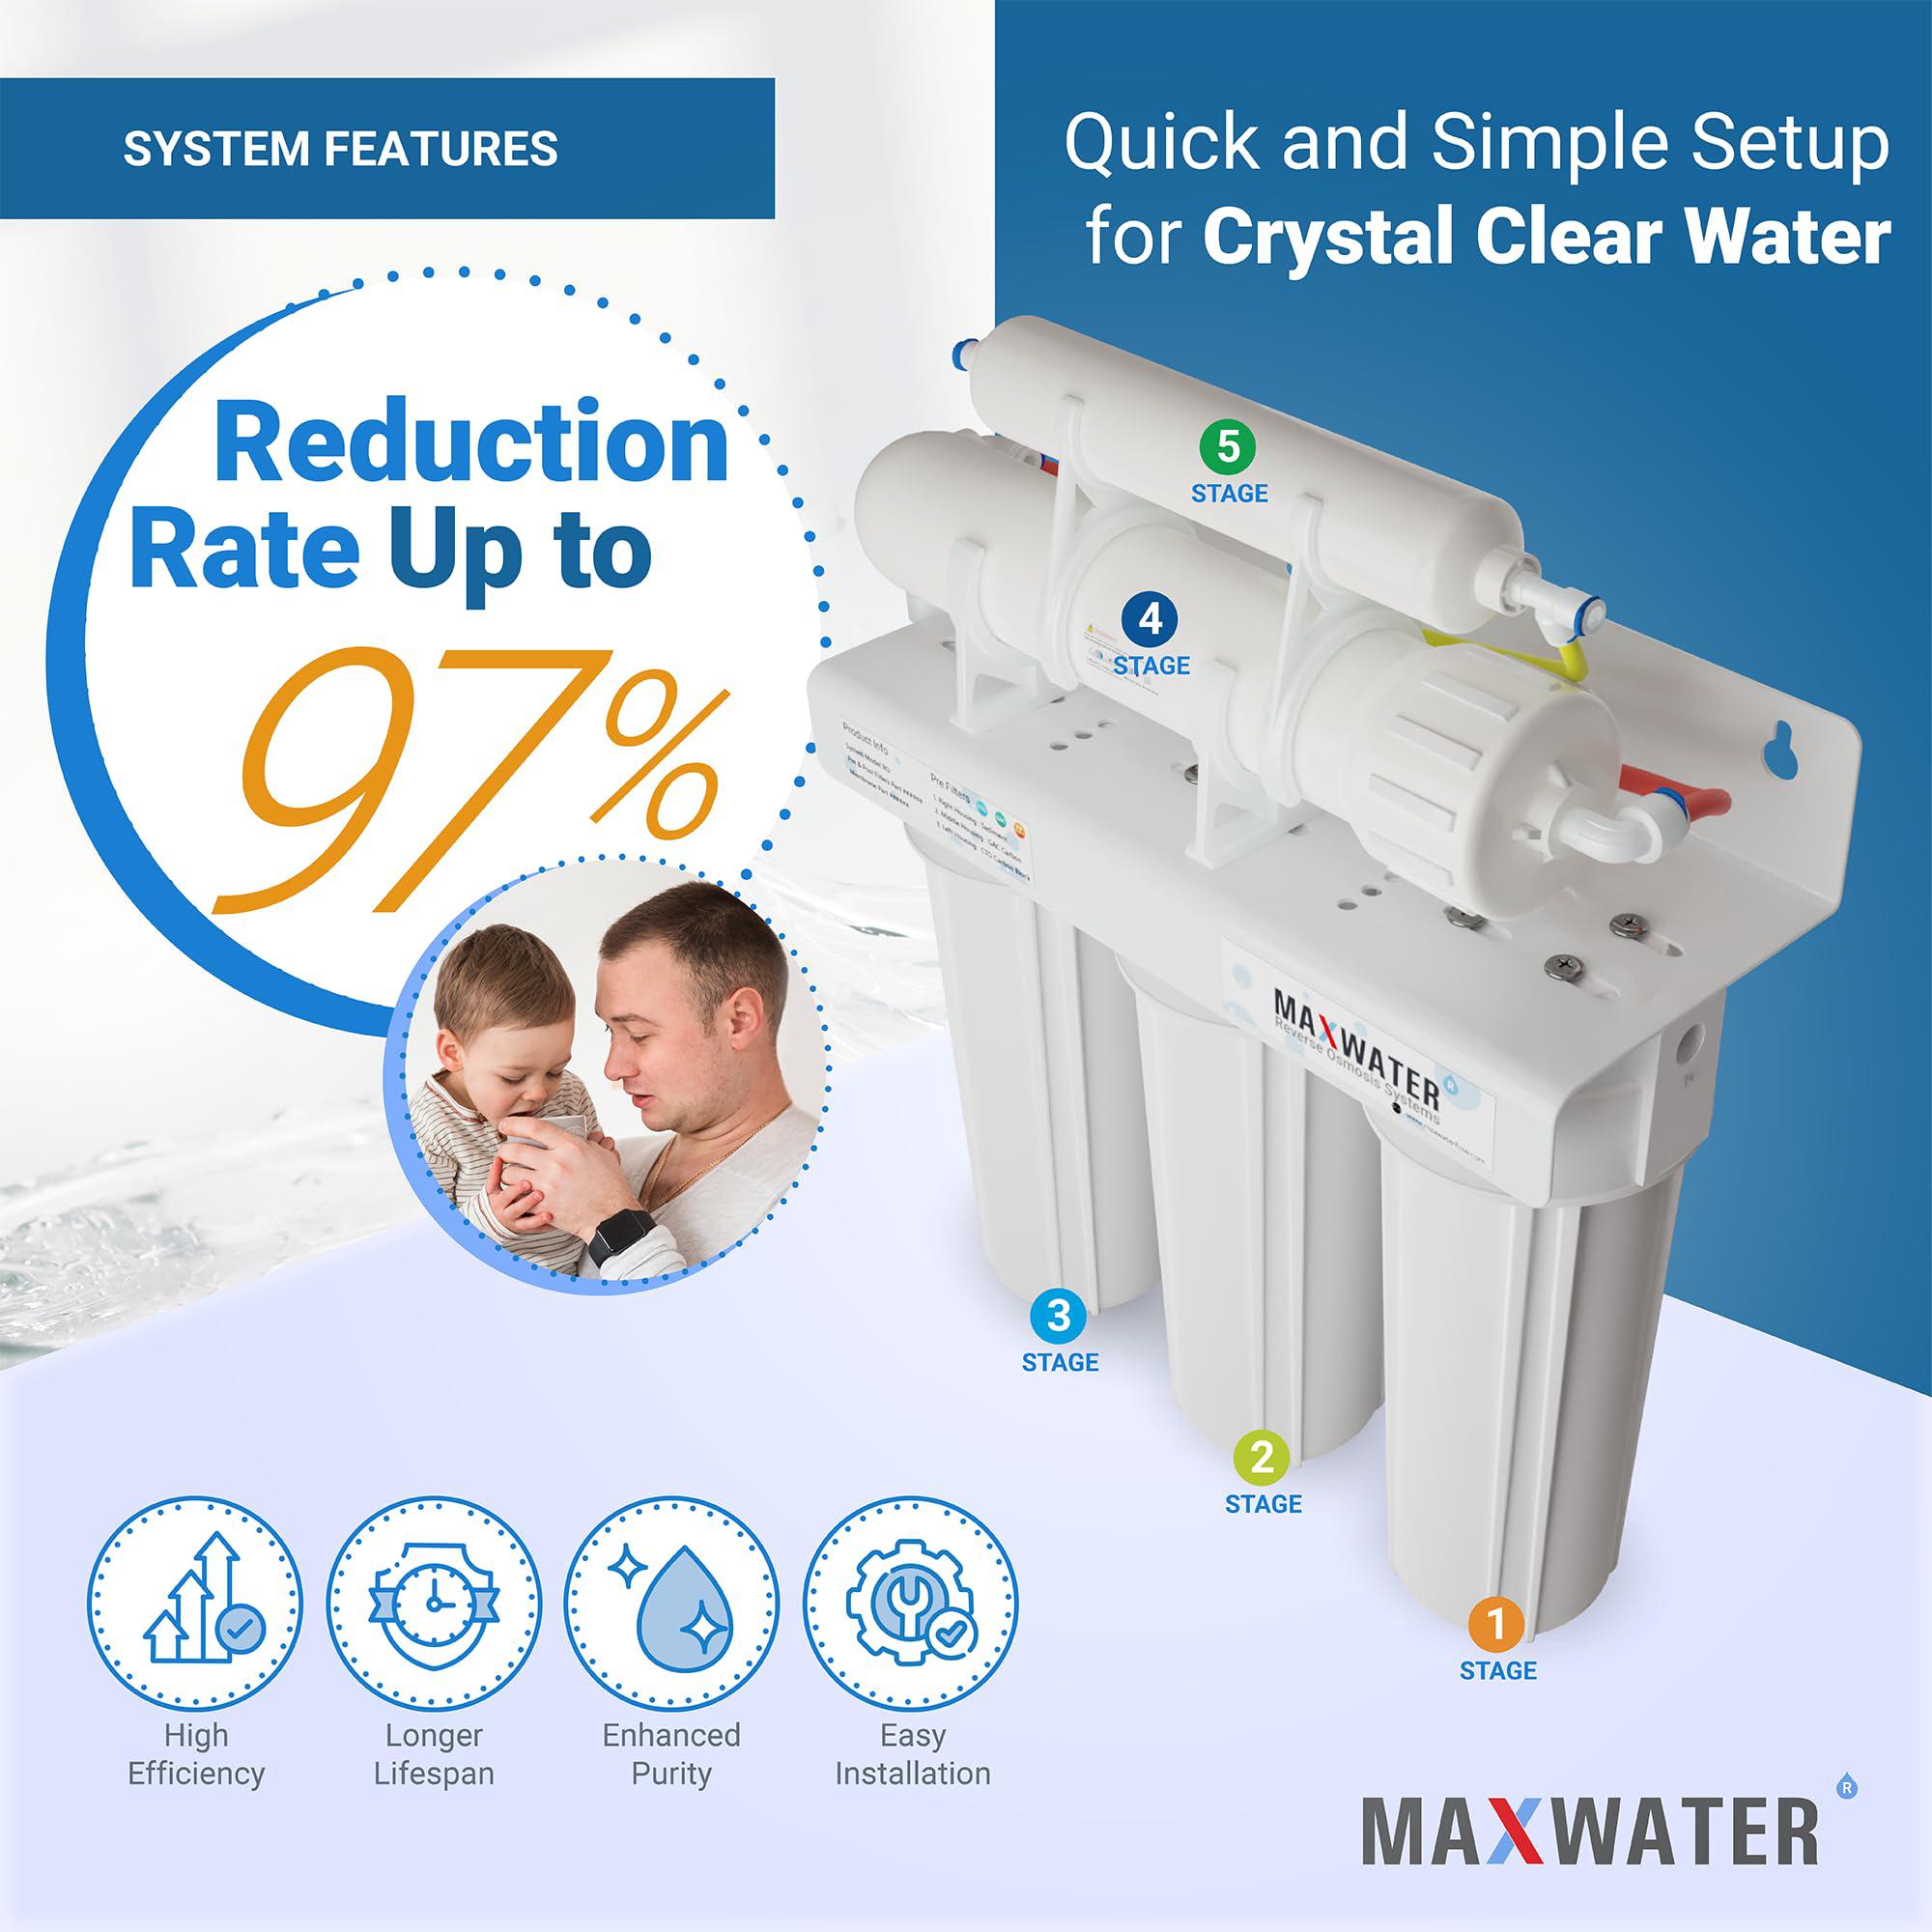 max water 5 stage 50 gpd (gallon per day) ro (reverse osmosis) standard water filtration system - under-sink/wall mount (with